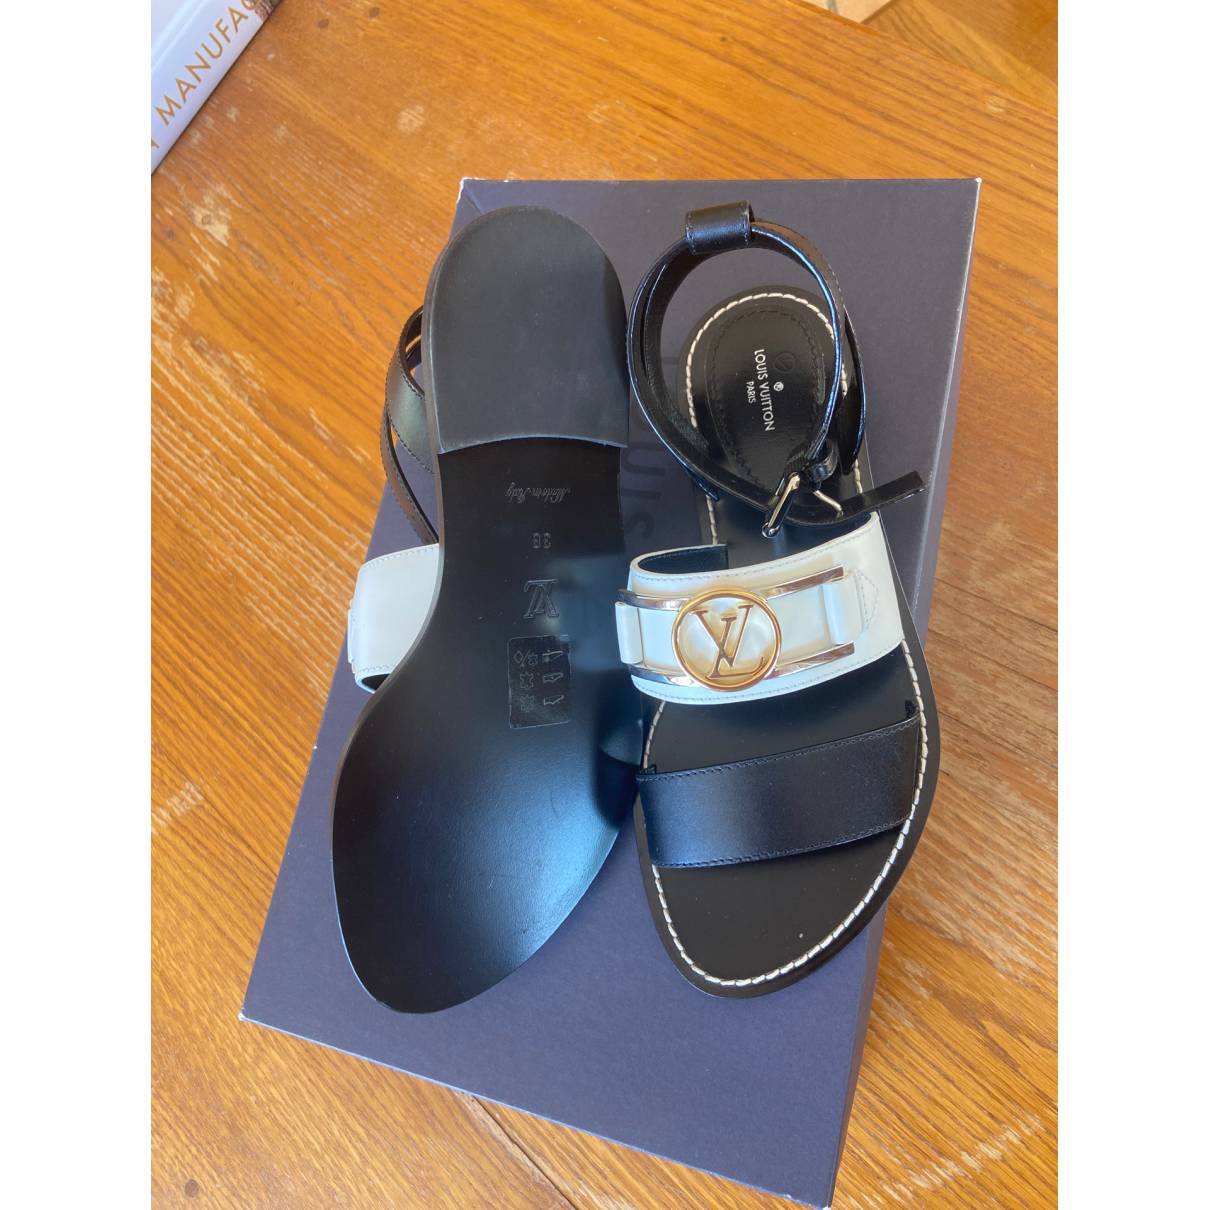 Academy leather sandals Louis Vuitton Black size 38 EU in Leather